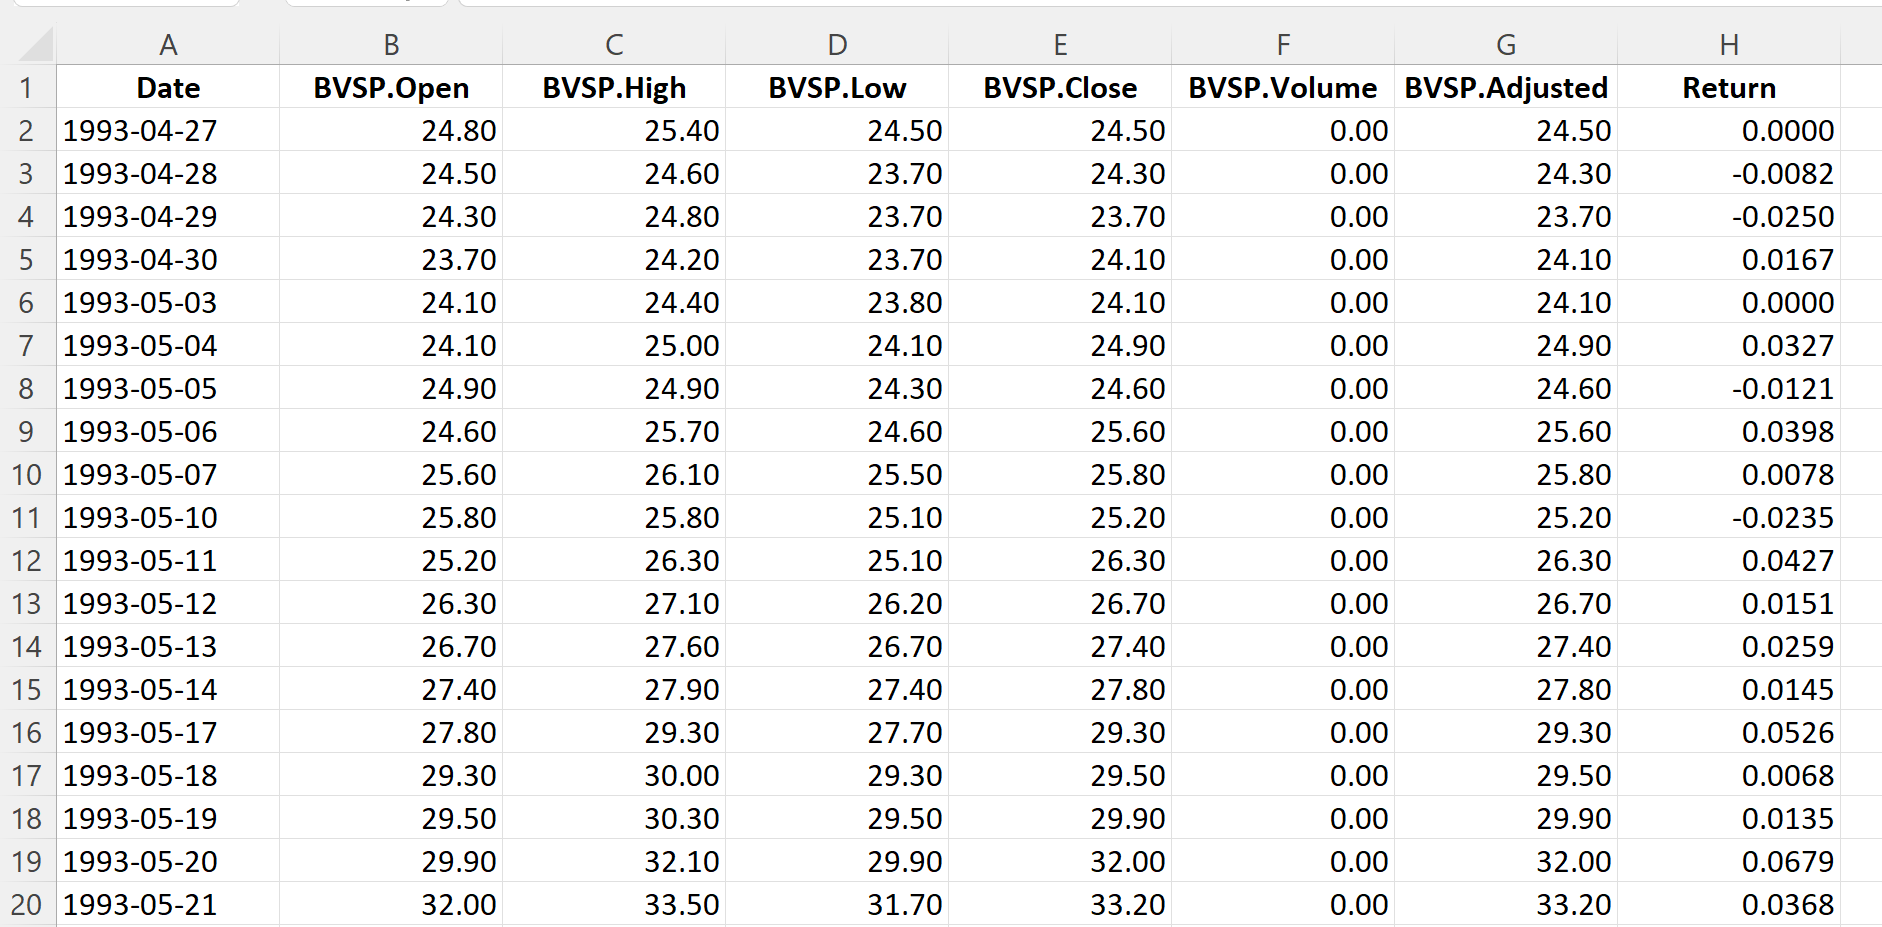 Top of the file for the BOVESPA index data